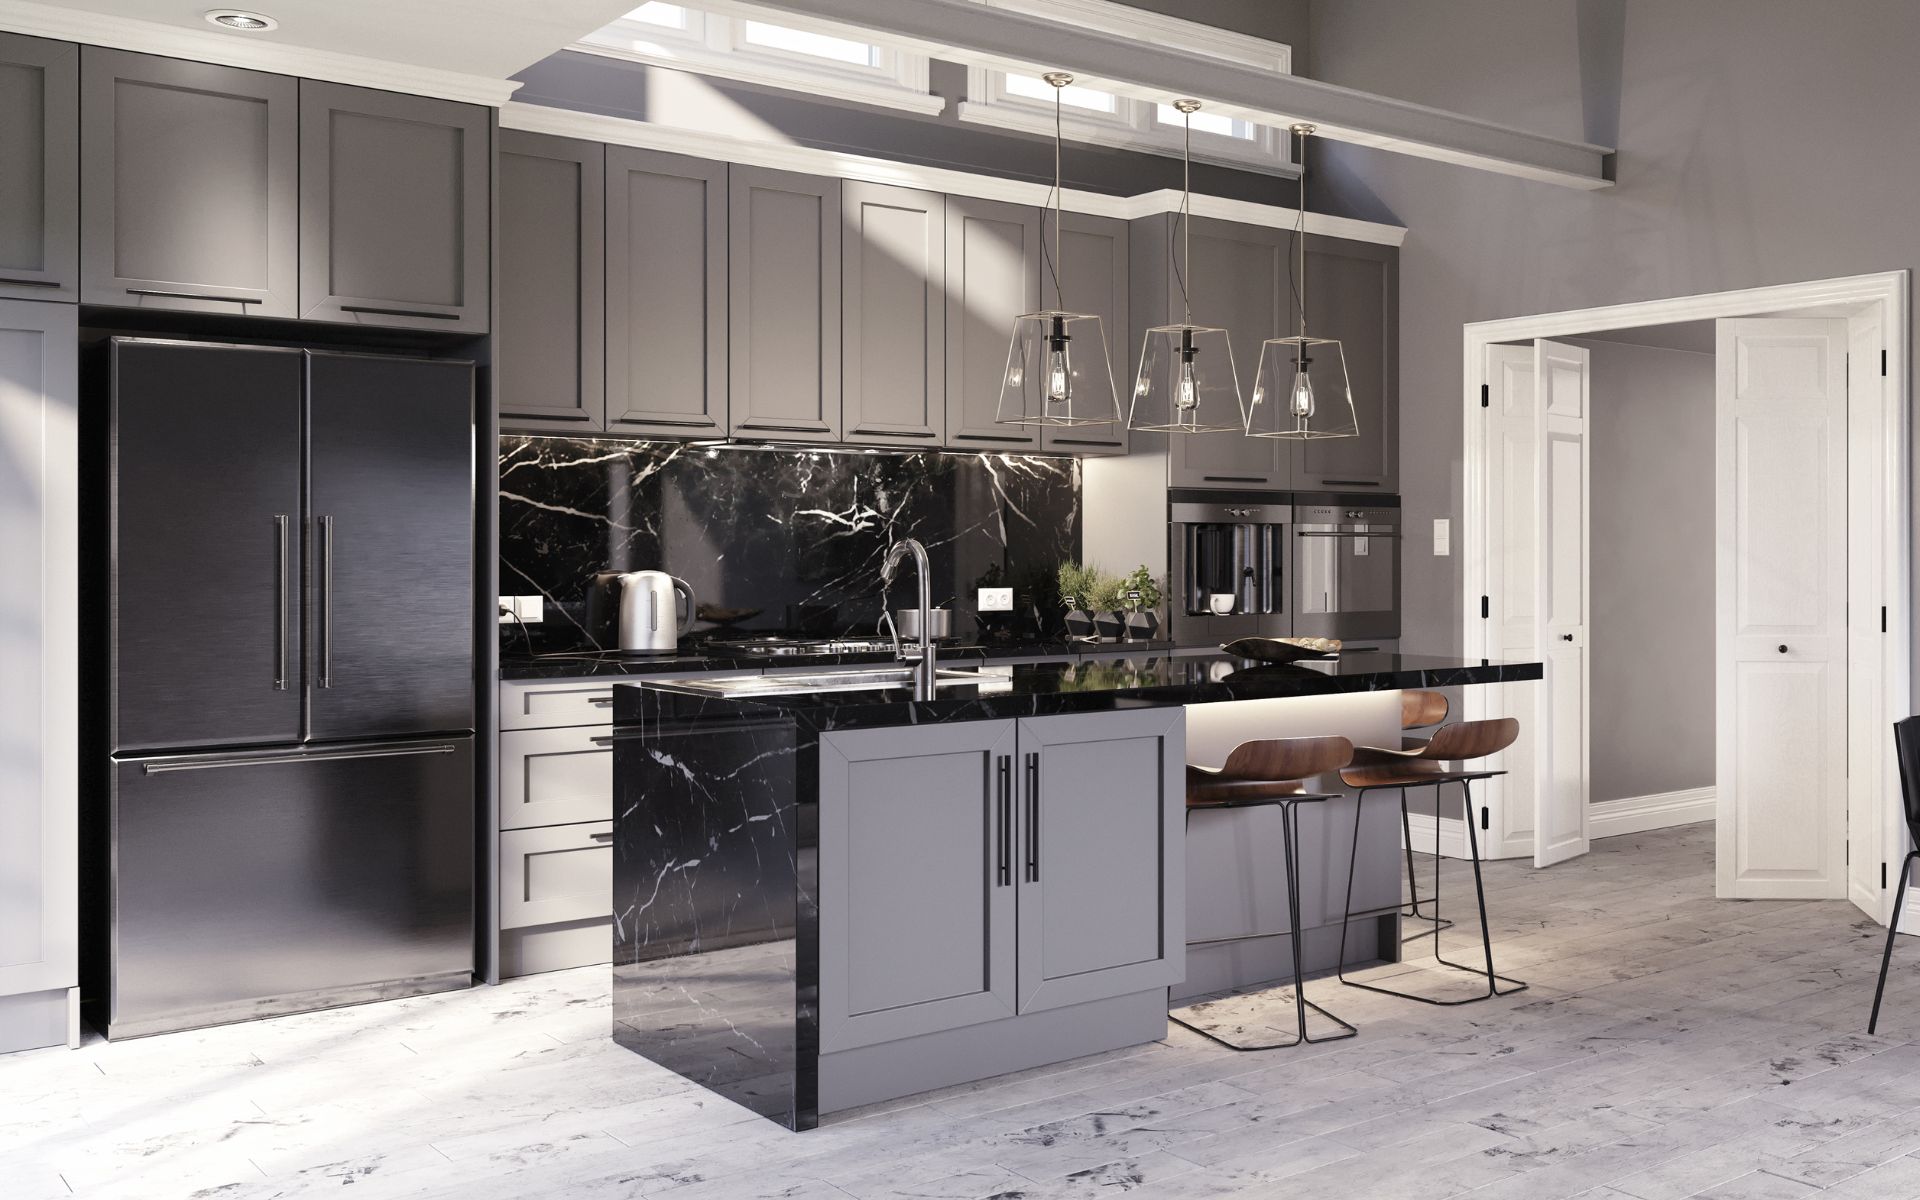 Elegant kitchen with gray cabinets and black countertop